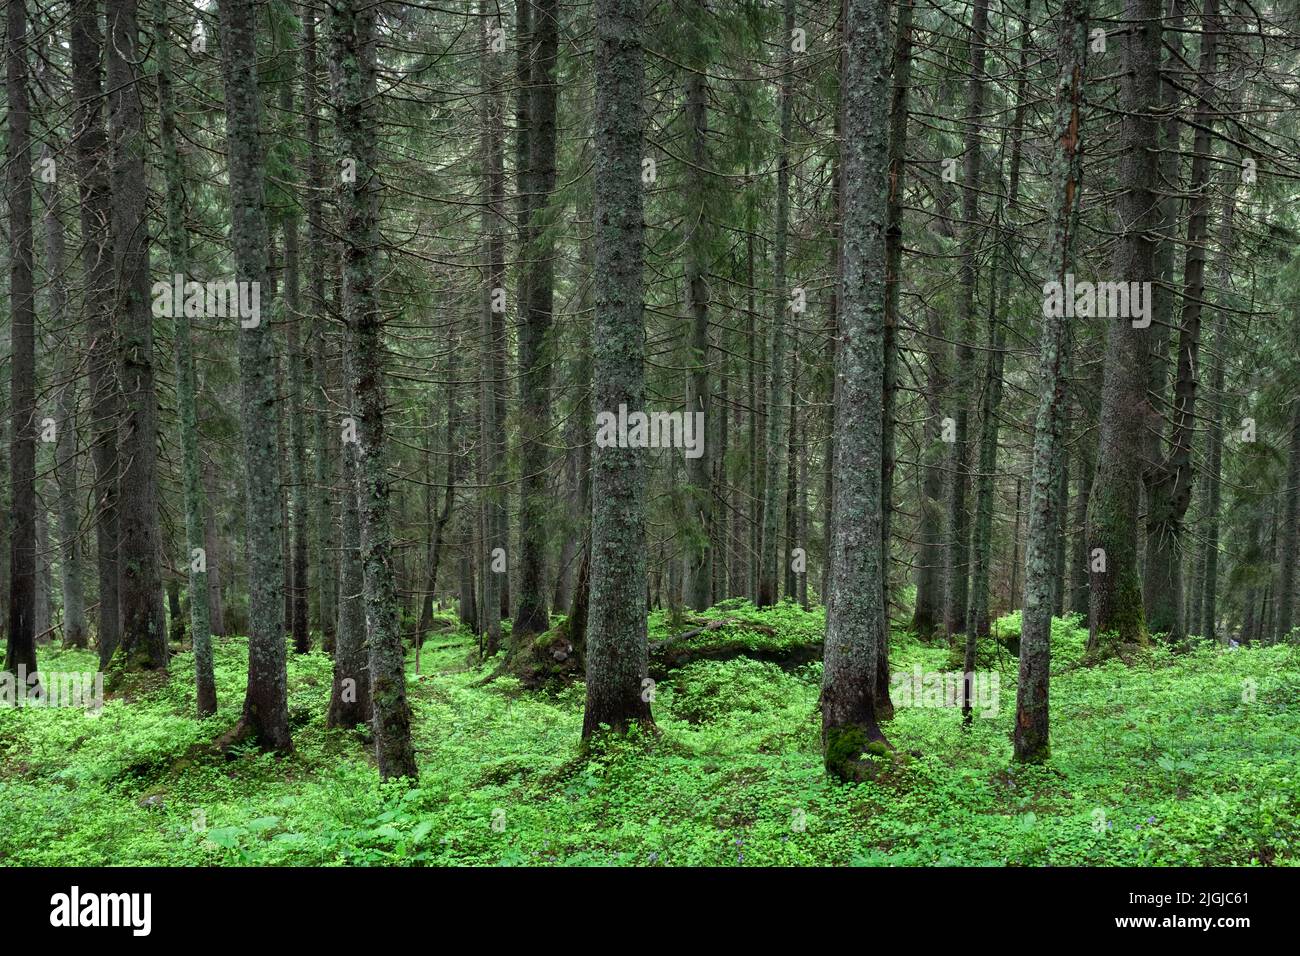 Beautiful summer evergreen forest with pine trees and lush grass. Nature background, landscape photography Stock Photo